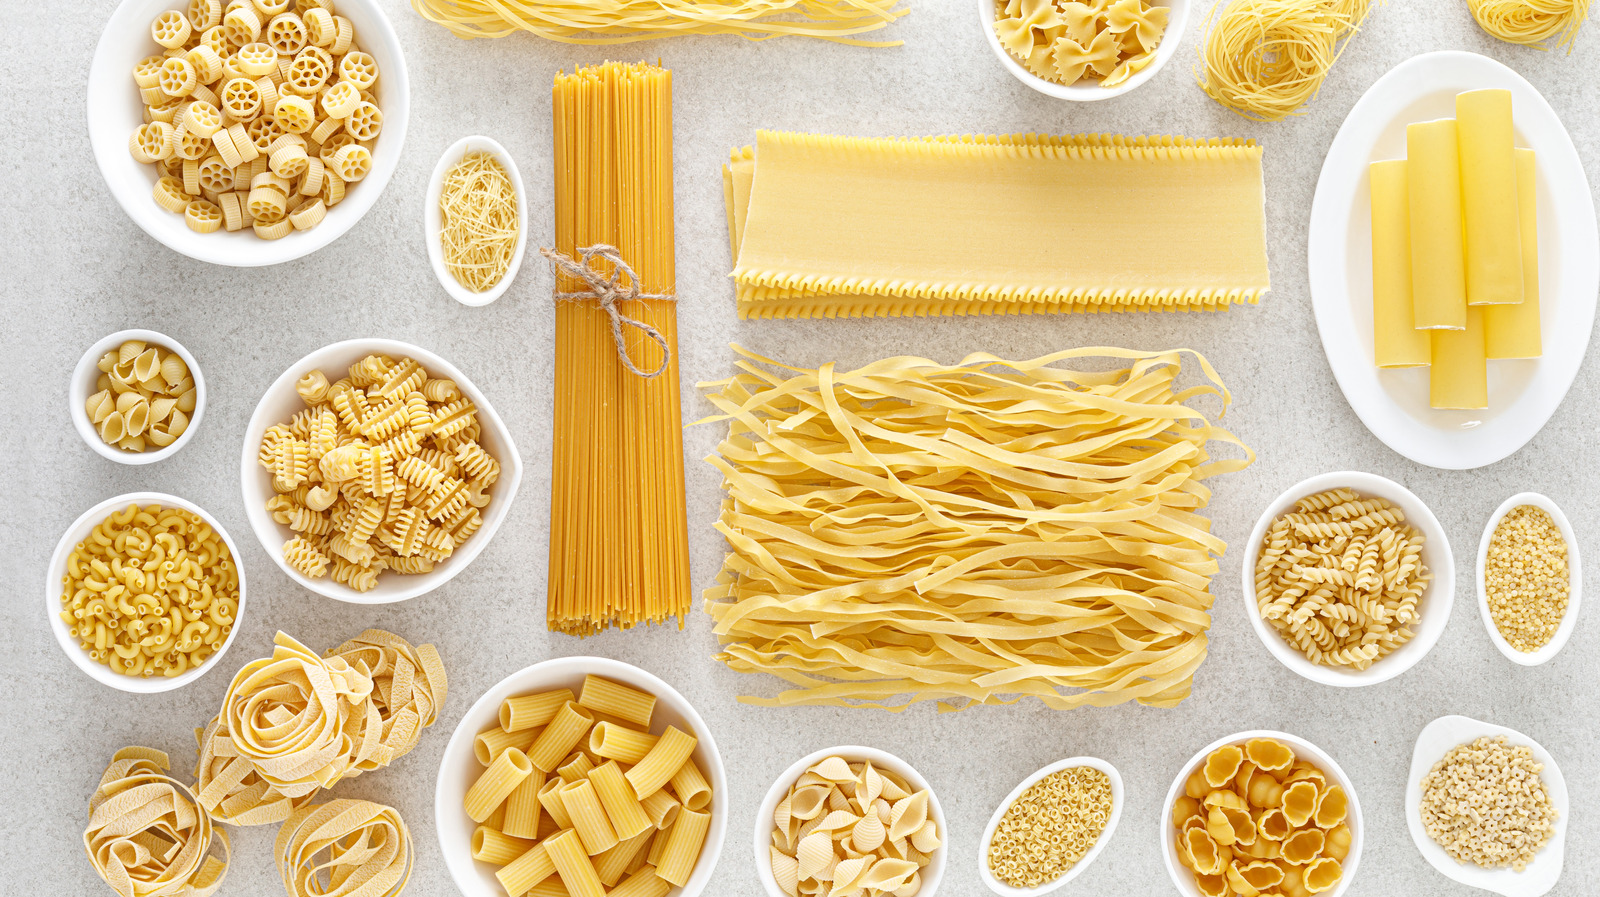 16 Low-Carb Alternatives To Pasta And Noodles